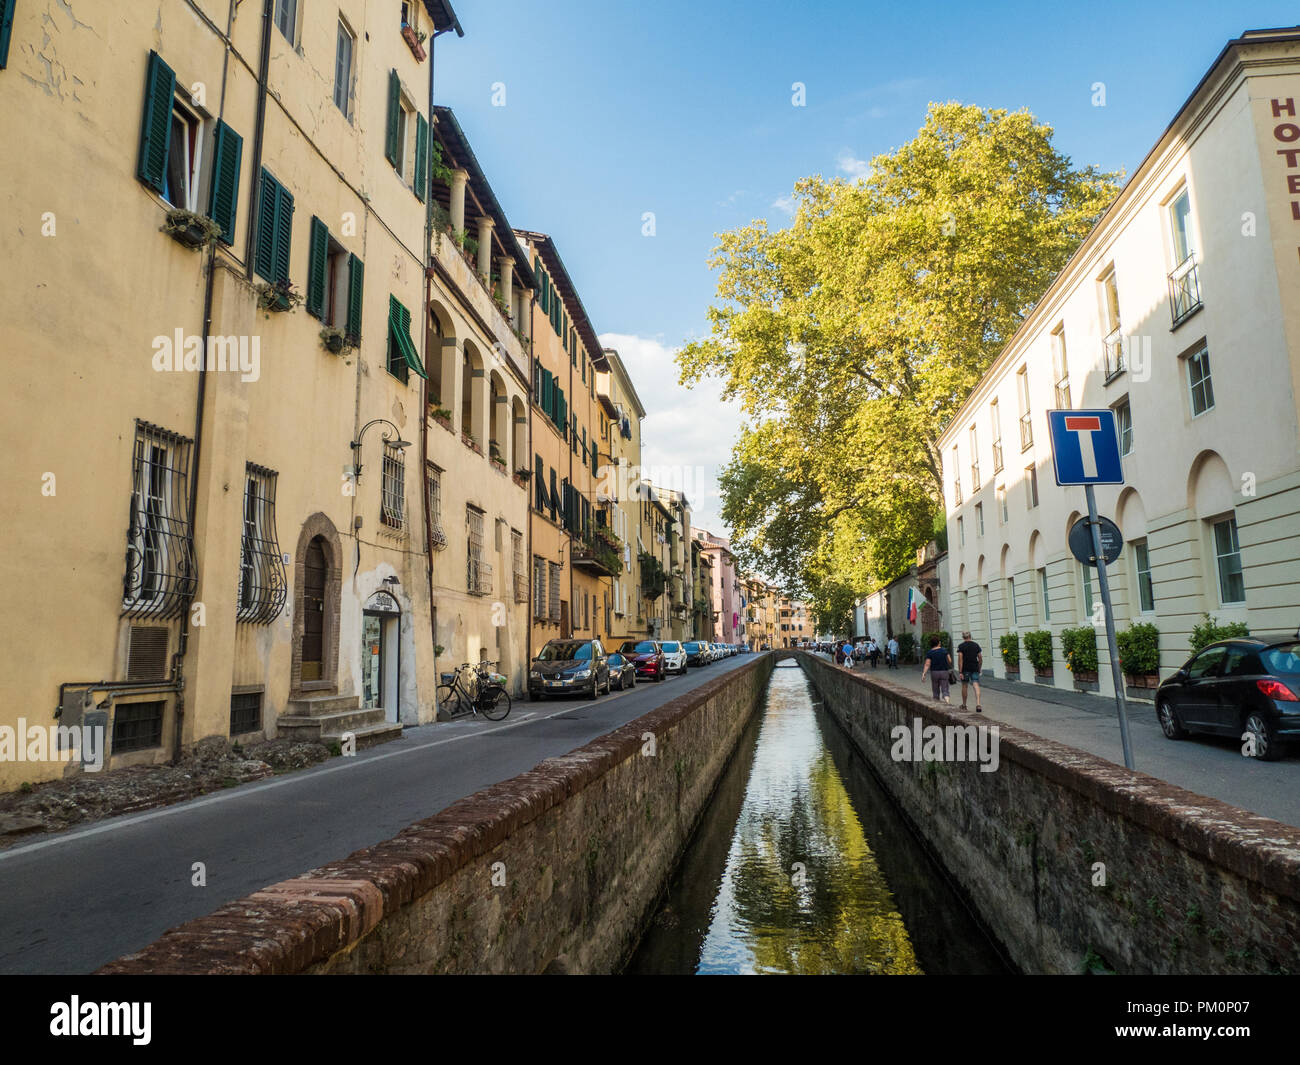 Historic canal/waterway in the walled city of Lucca, Tuscany, Italy. Stock Photo